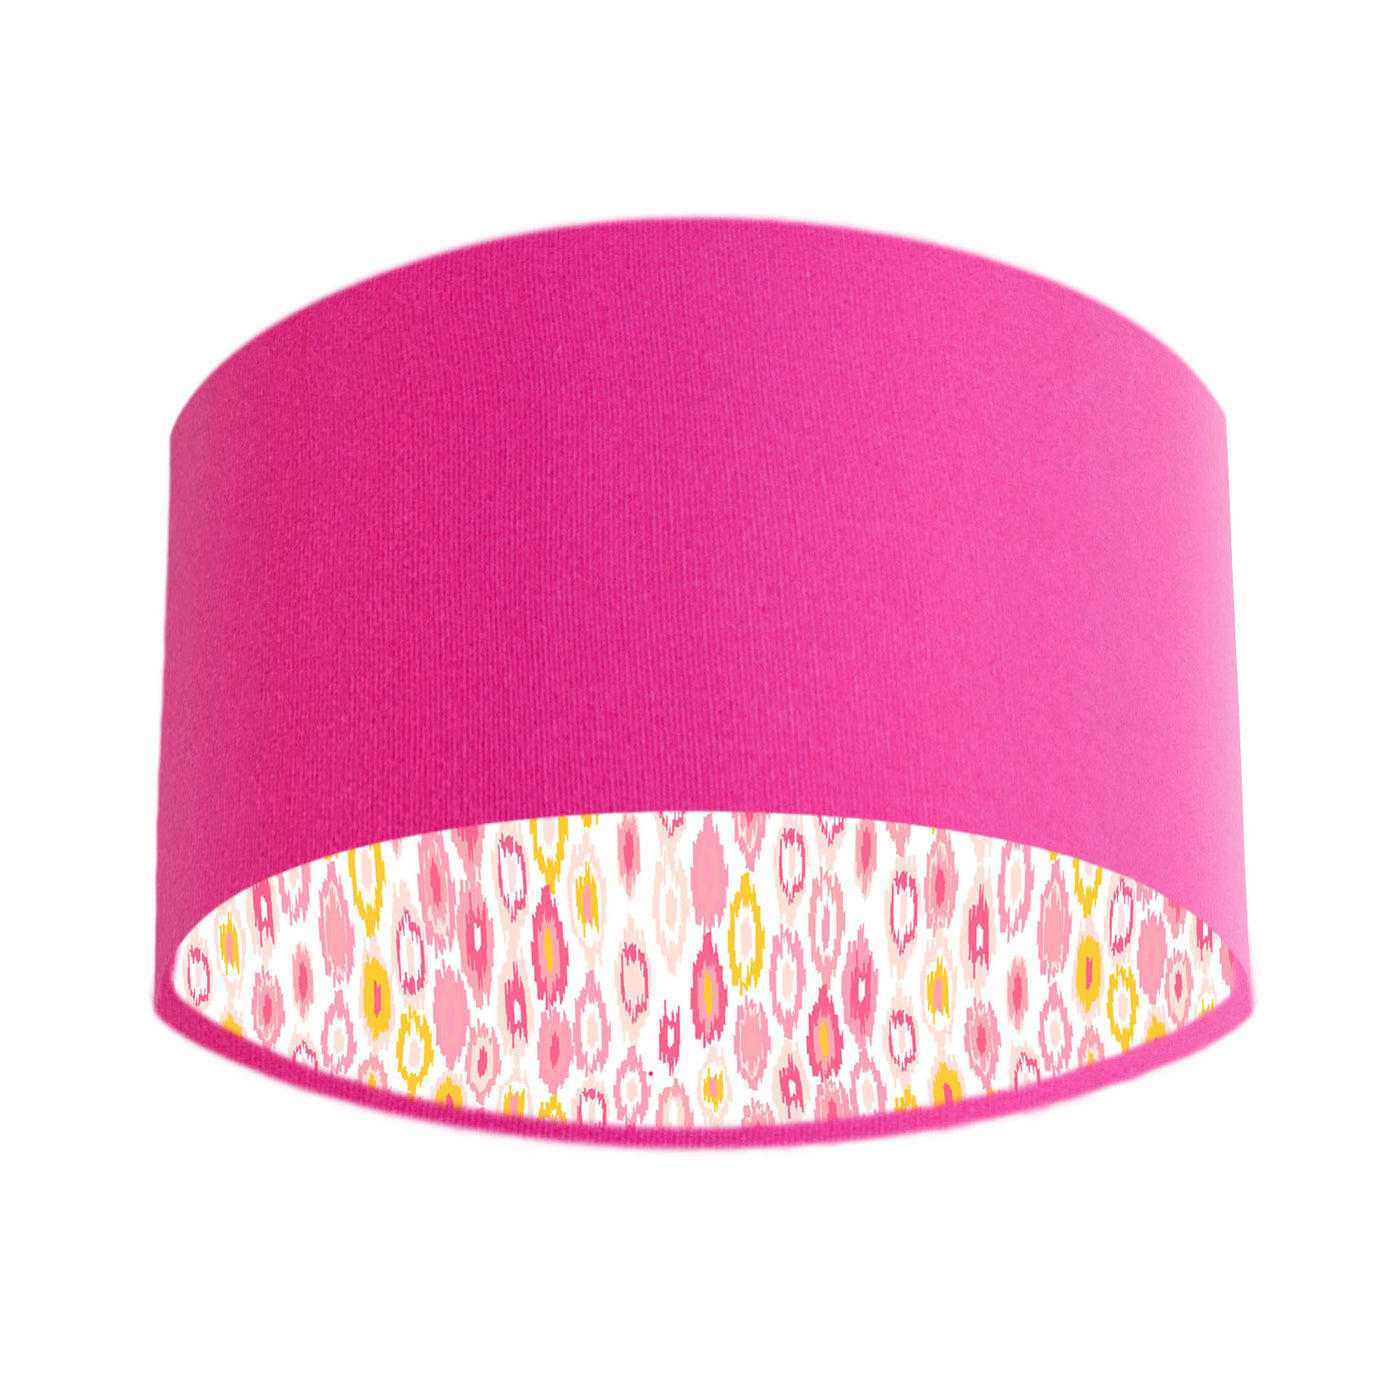 30cm hot pink cotton lampshade with ikat lining - lampshade on sale